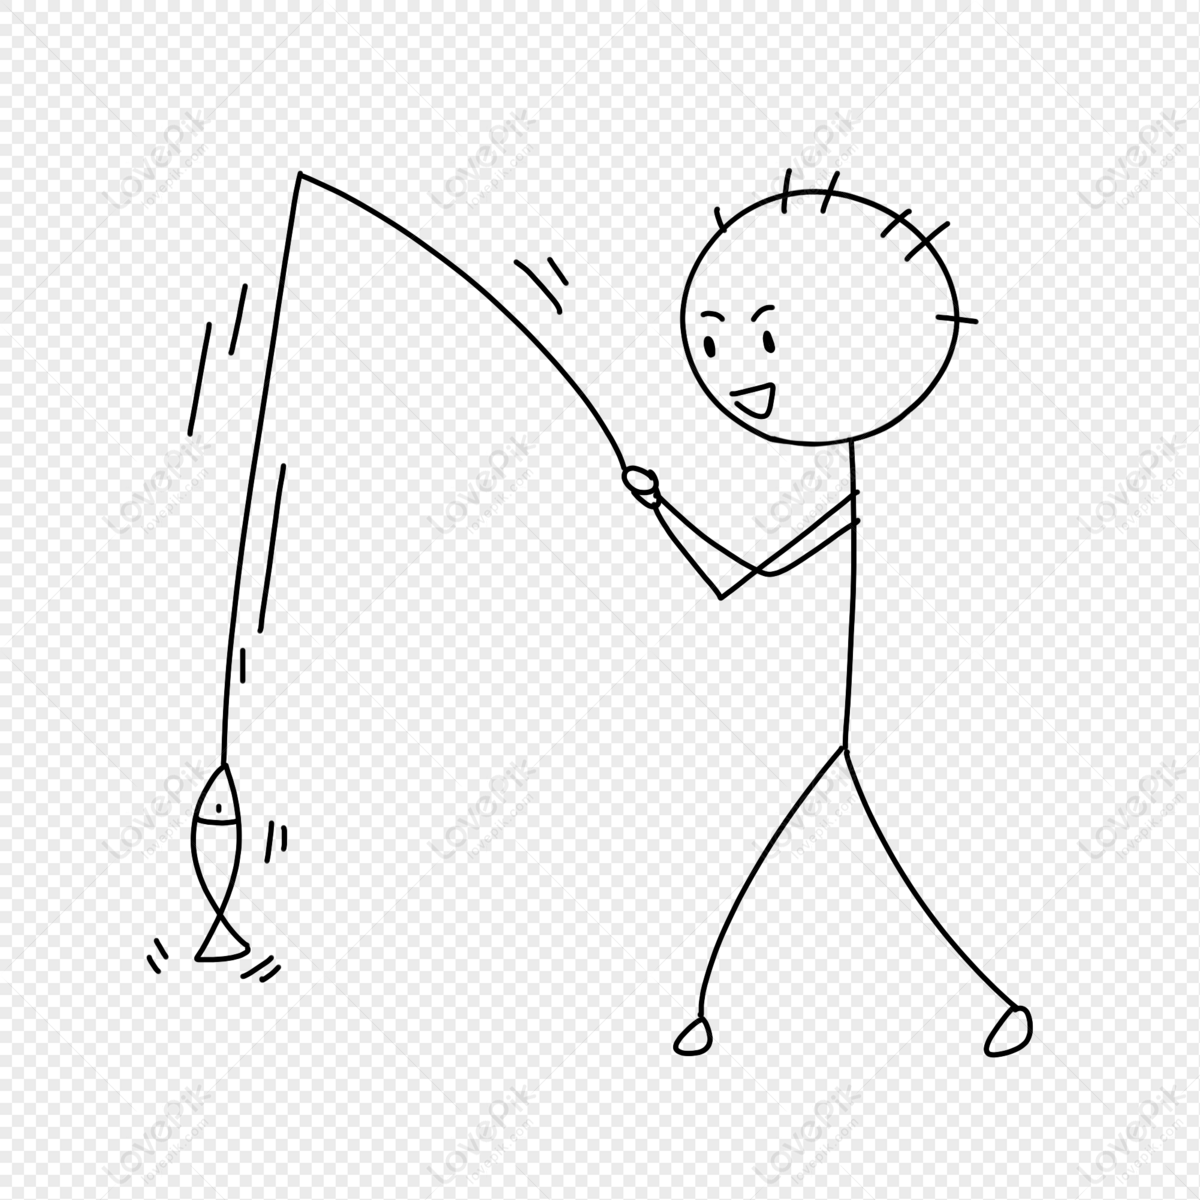 Bold Black Stick Figure - Stick Man With No Background - Free Transparent  PNG Download - PNGkey